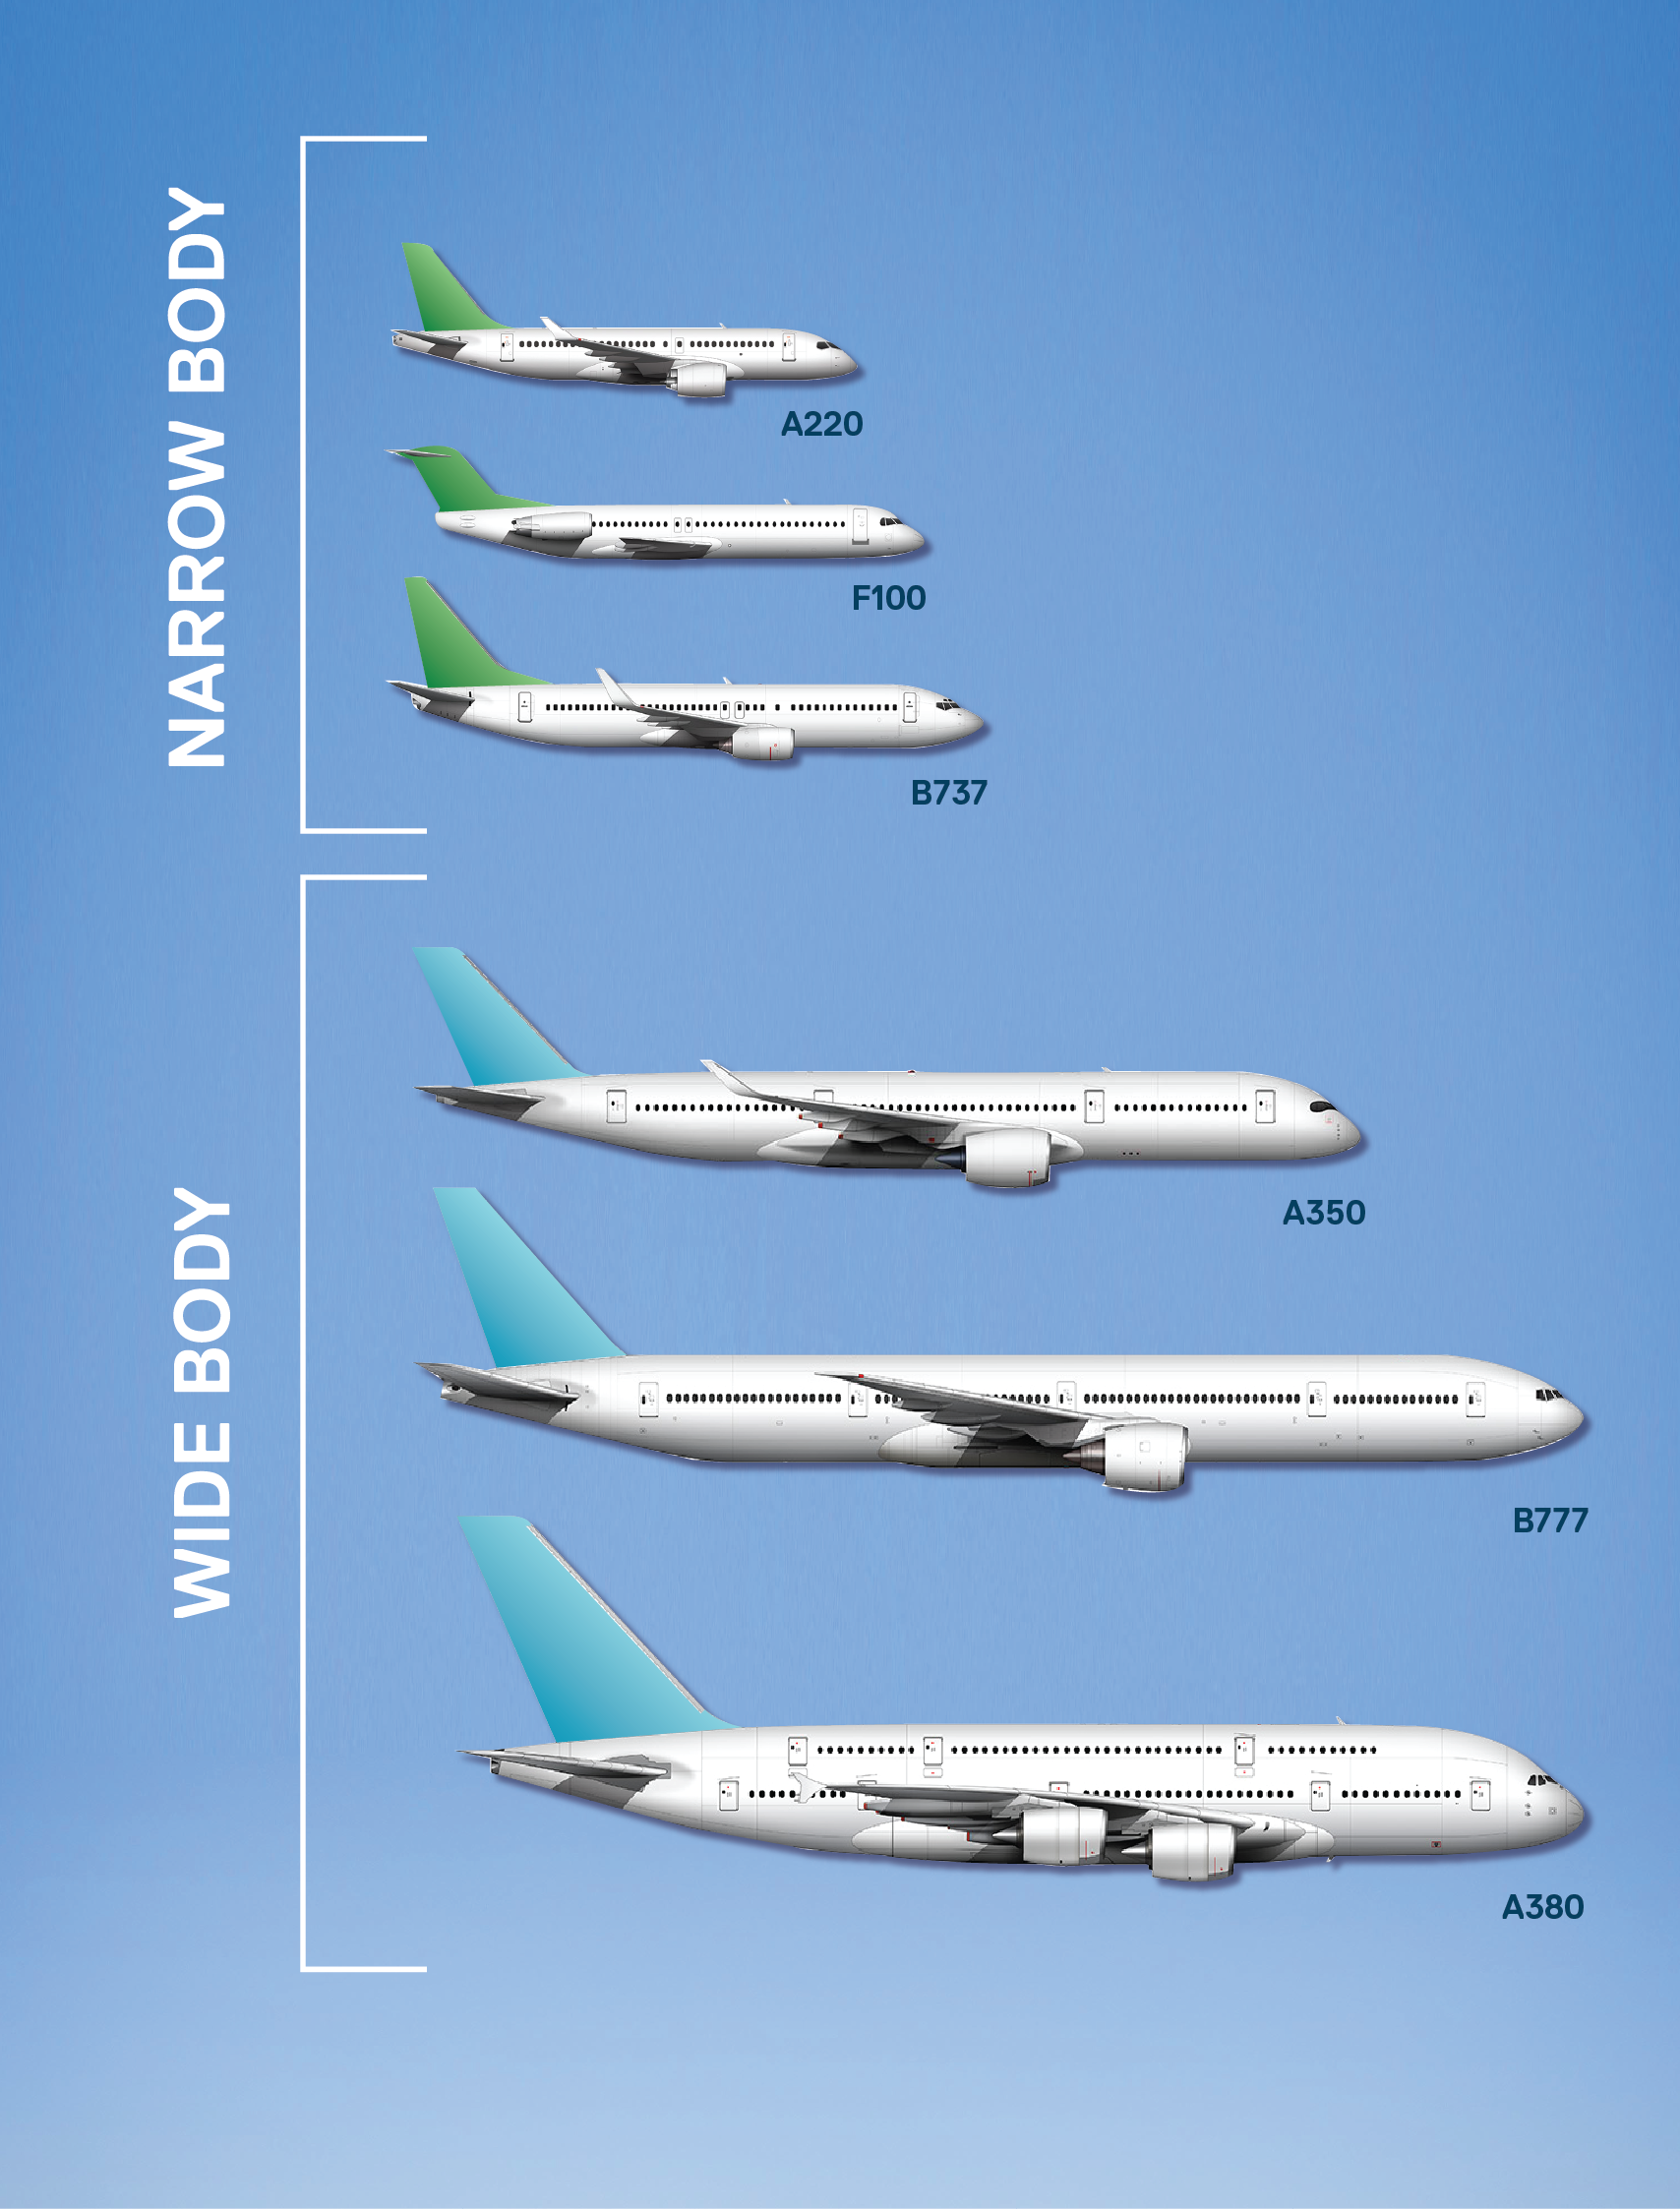 Six planes showing the difference between wide-body planes